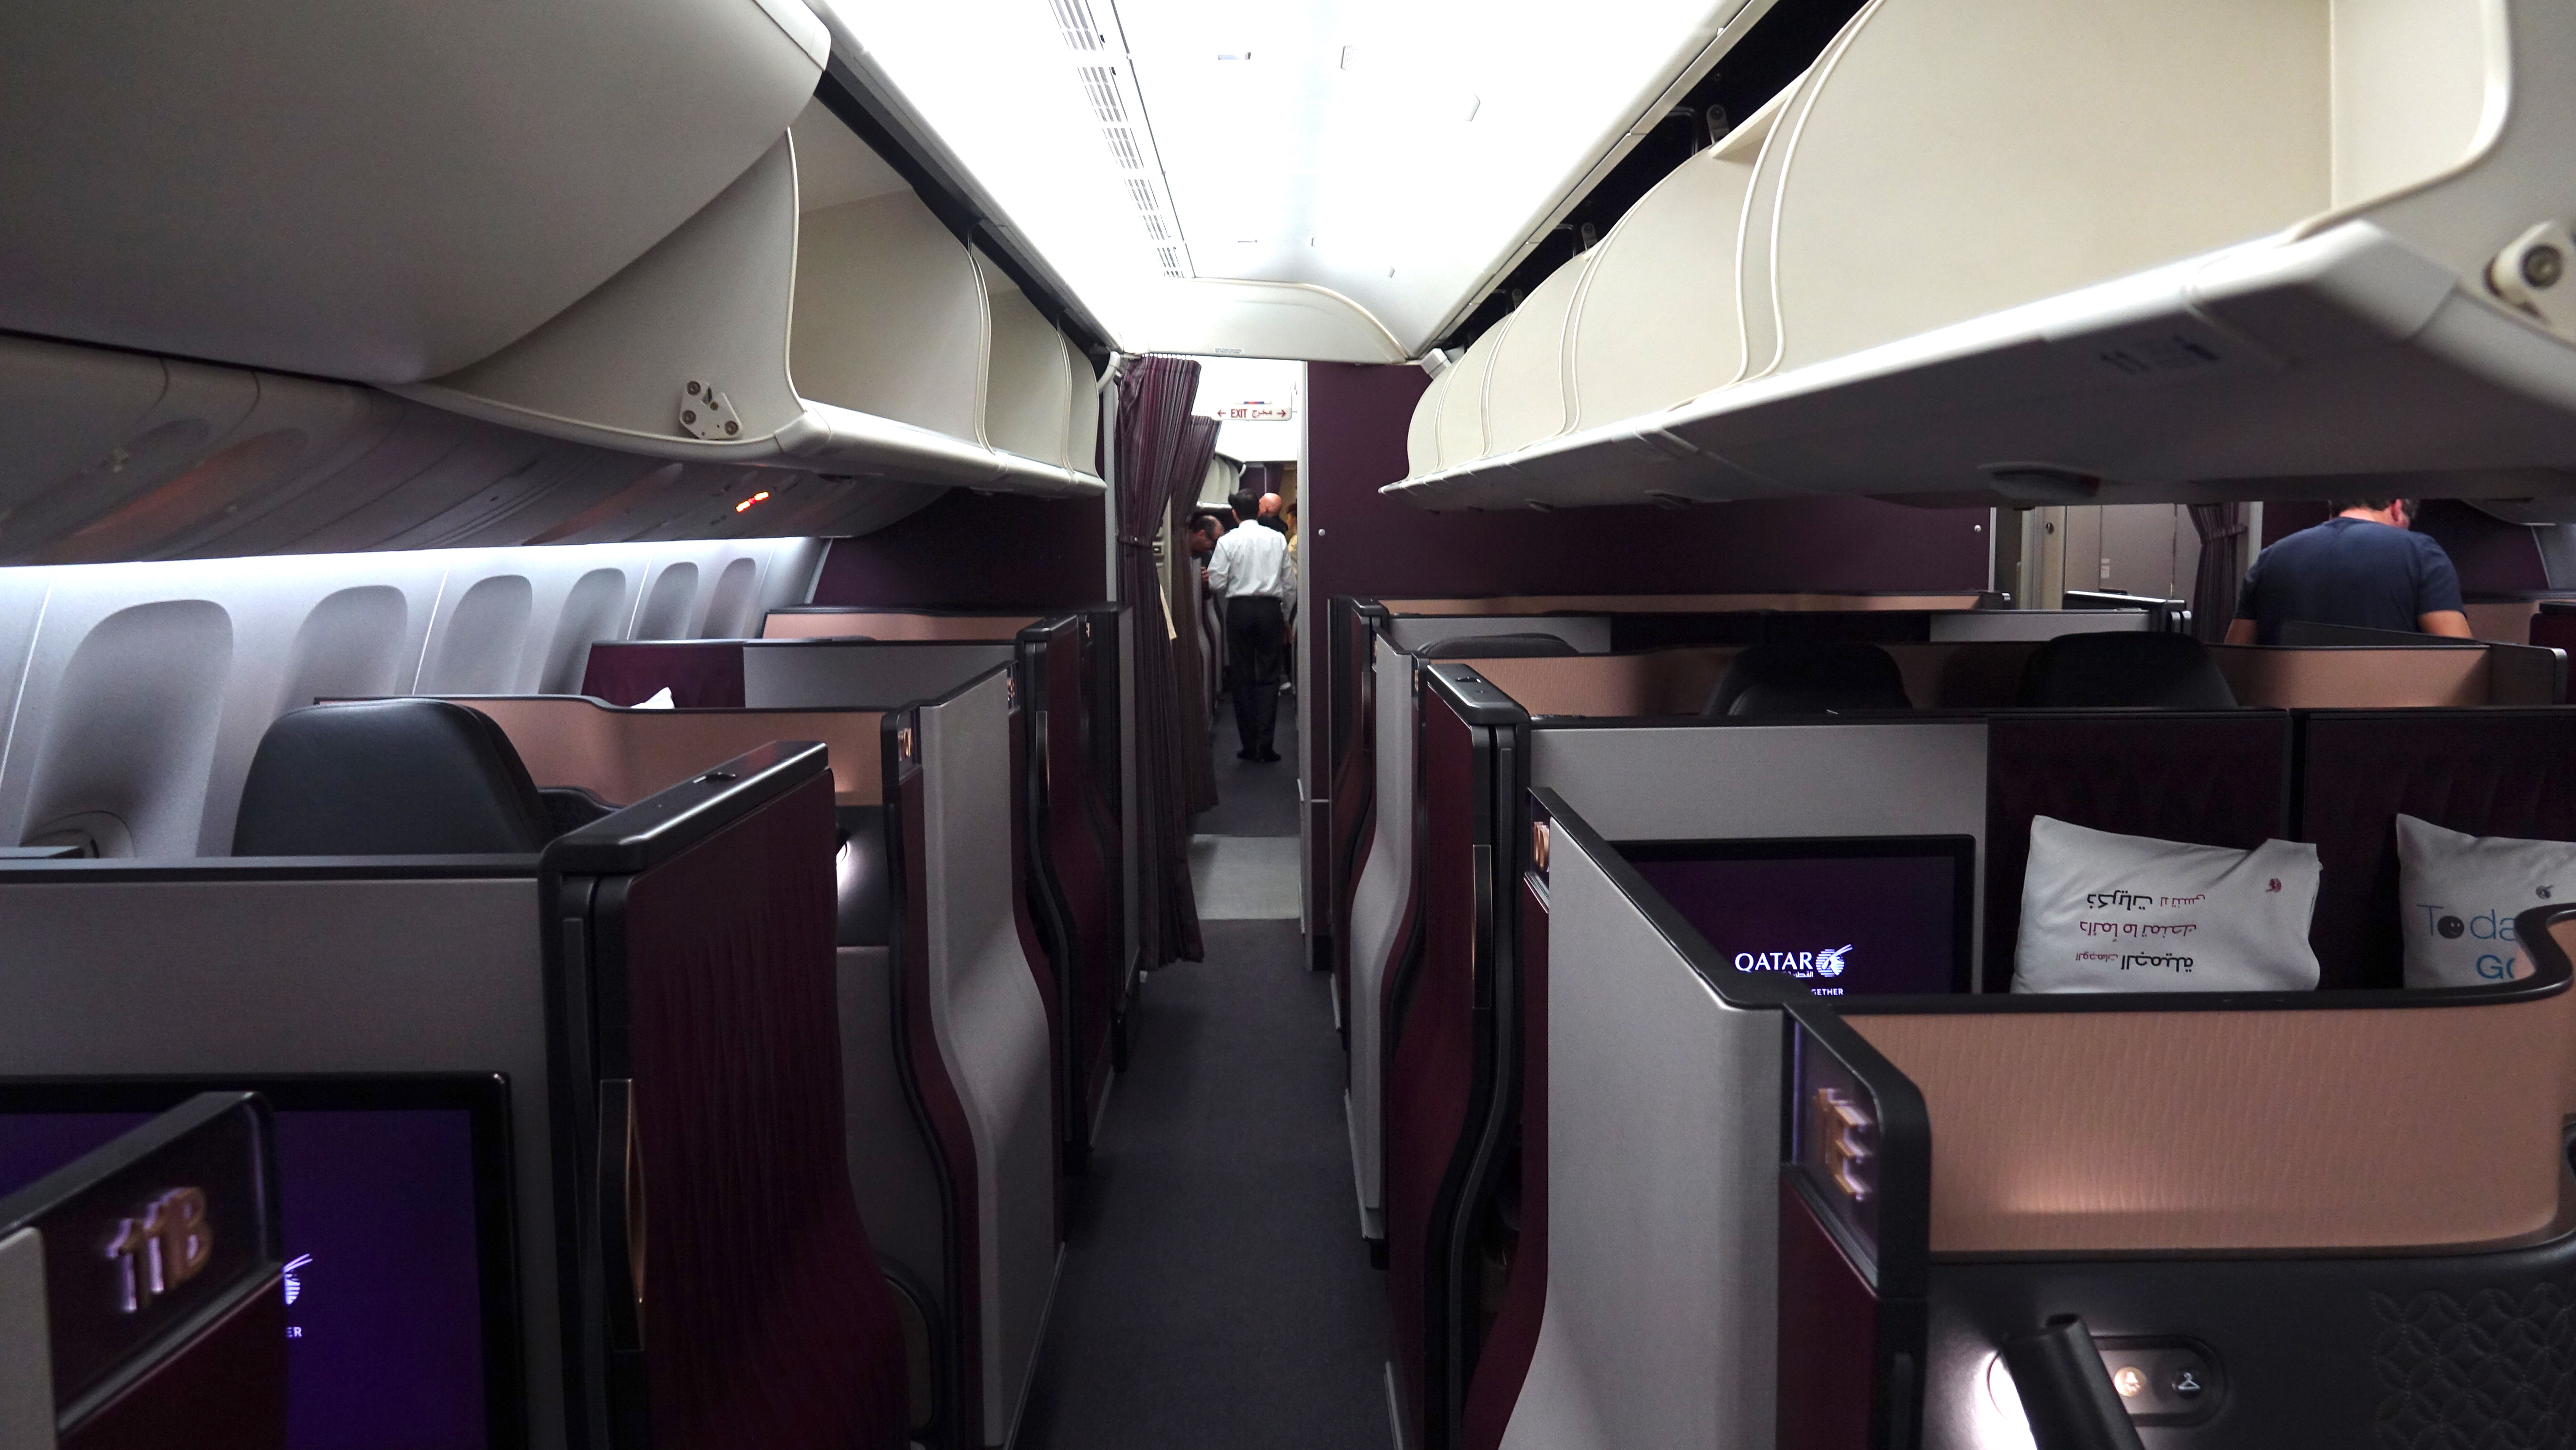 a inside of an airplane with rows of seats